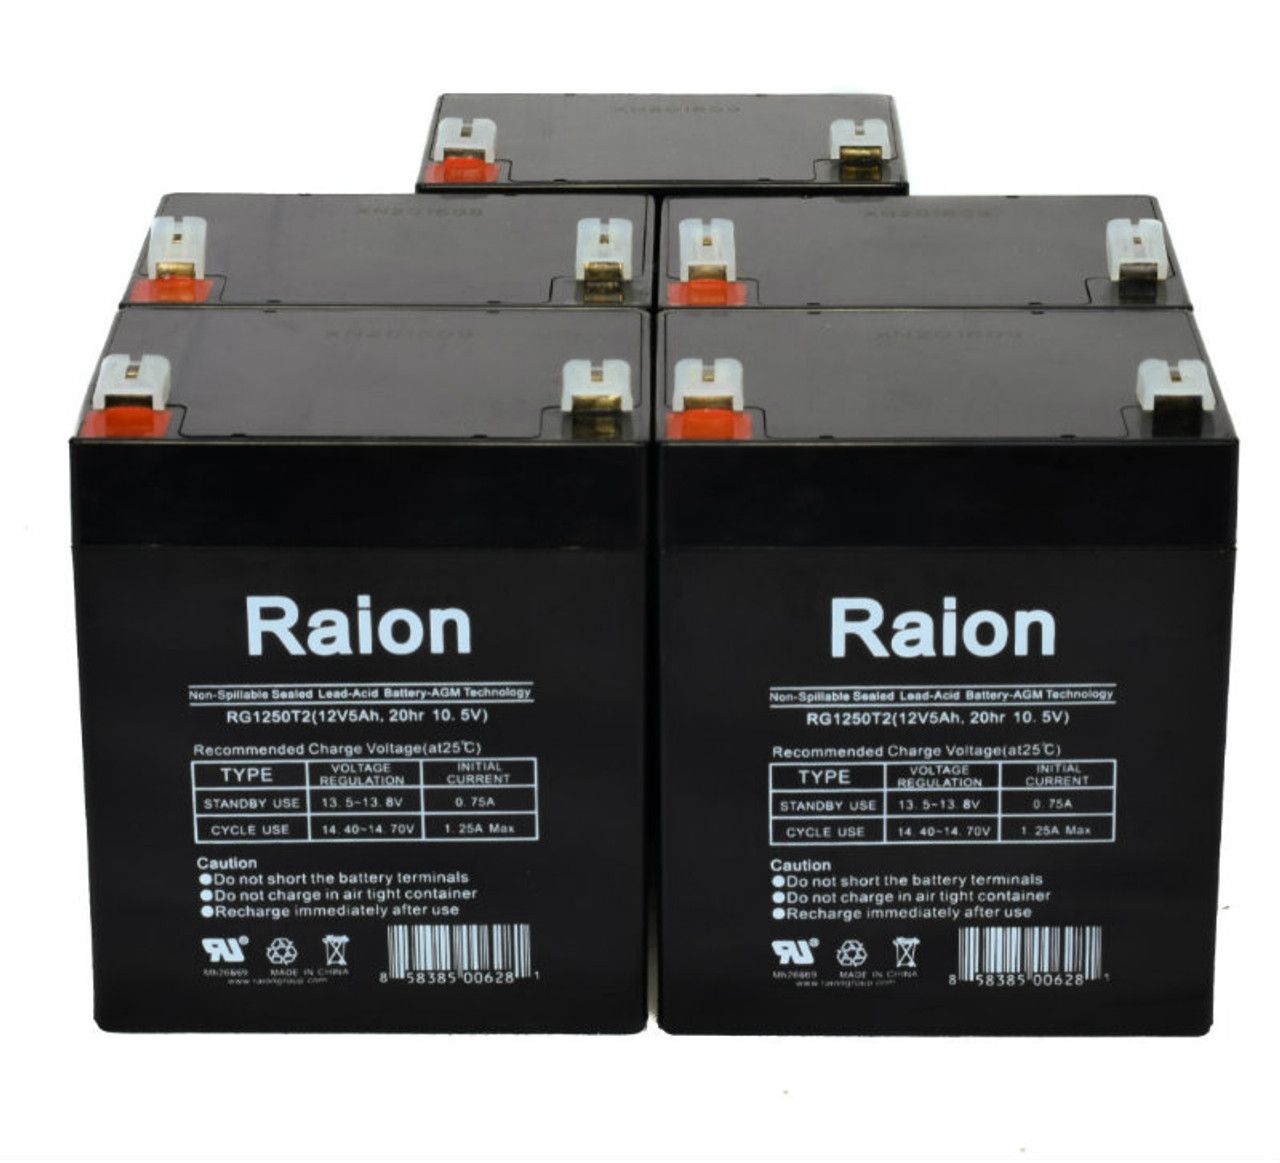 Raion Power RG1250T1 Replacement Fire Alarm Control Panel Battery for Ansul Alarms A15604 - 8 Pack